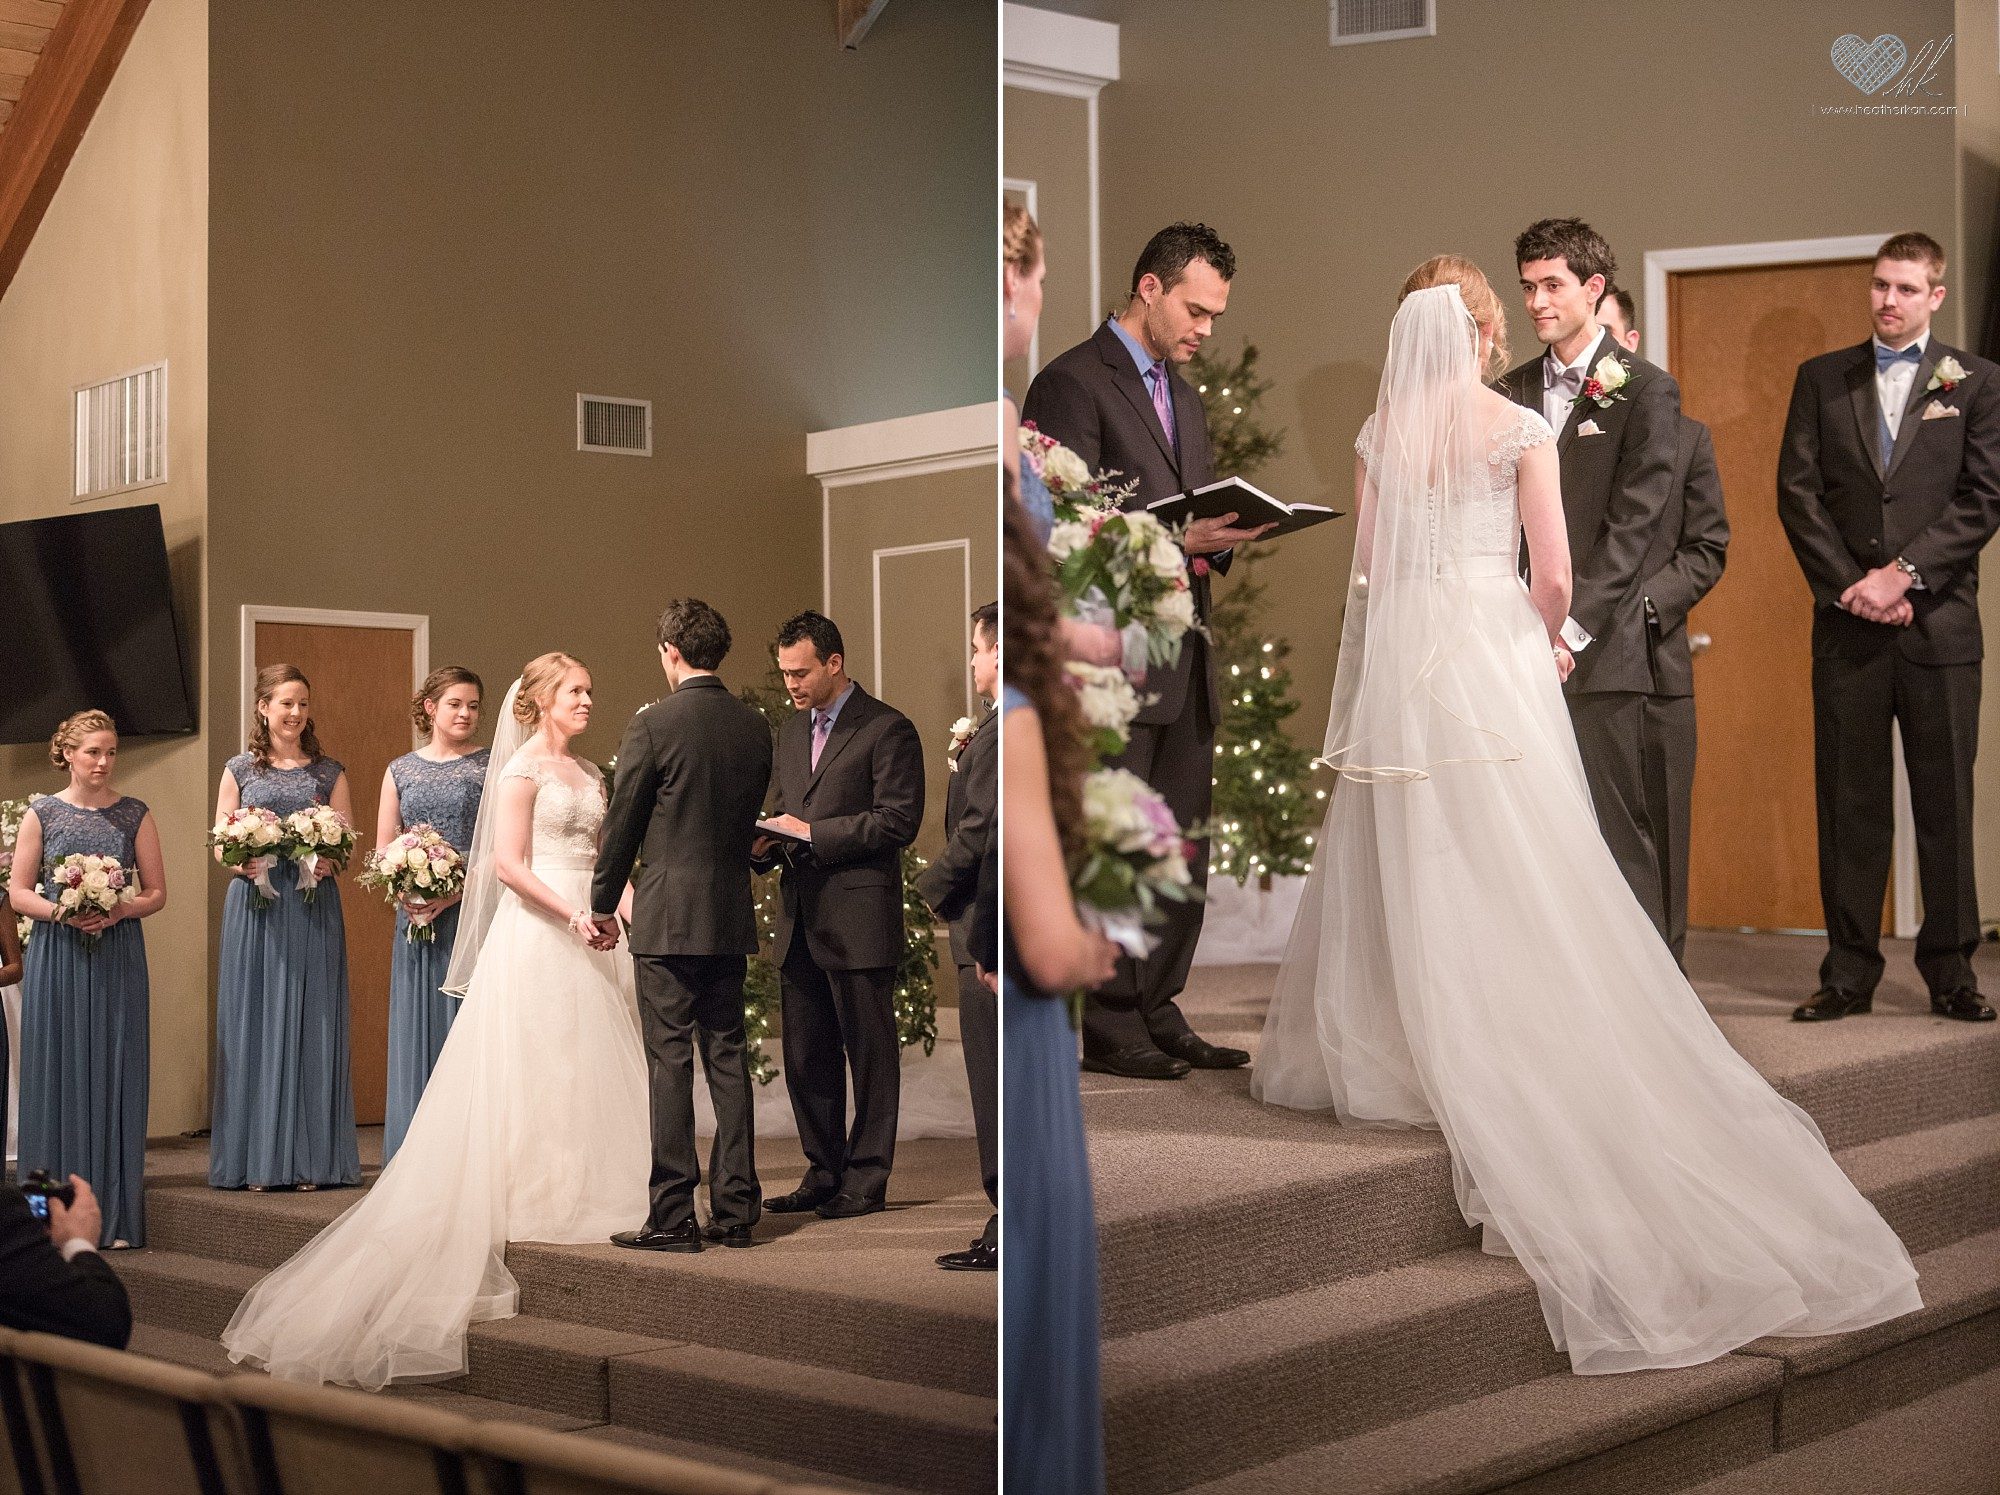 Wedding ceremony at Woodside Bible Church, Plymouth Michigan